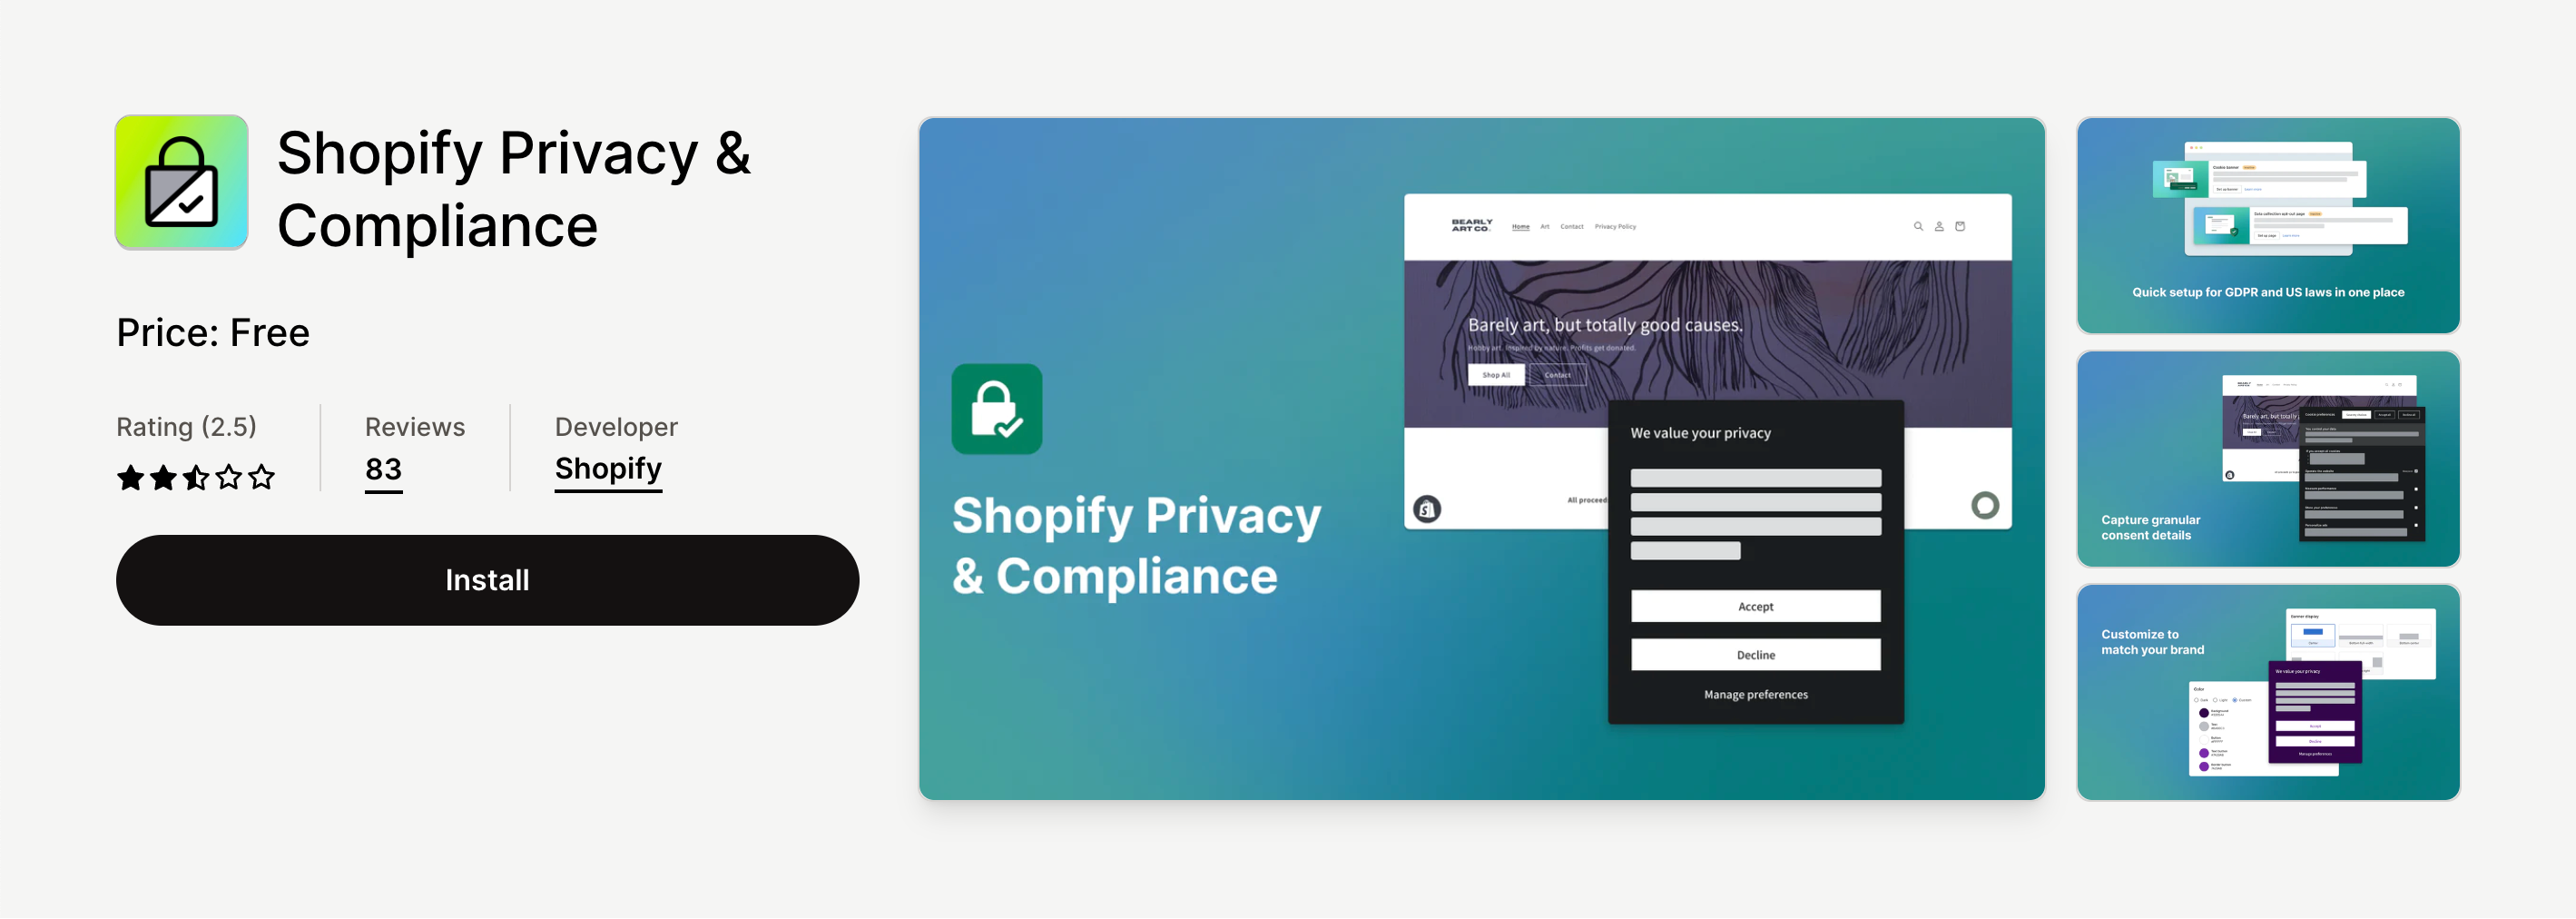 Shopify Privacy & Complience cookie banner